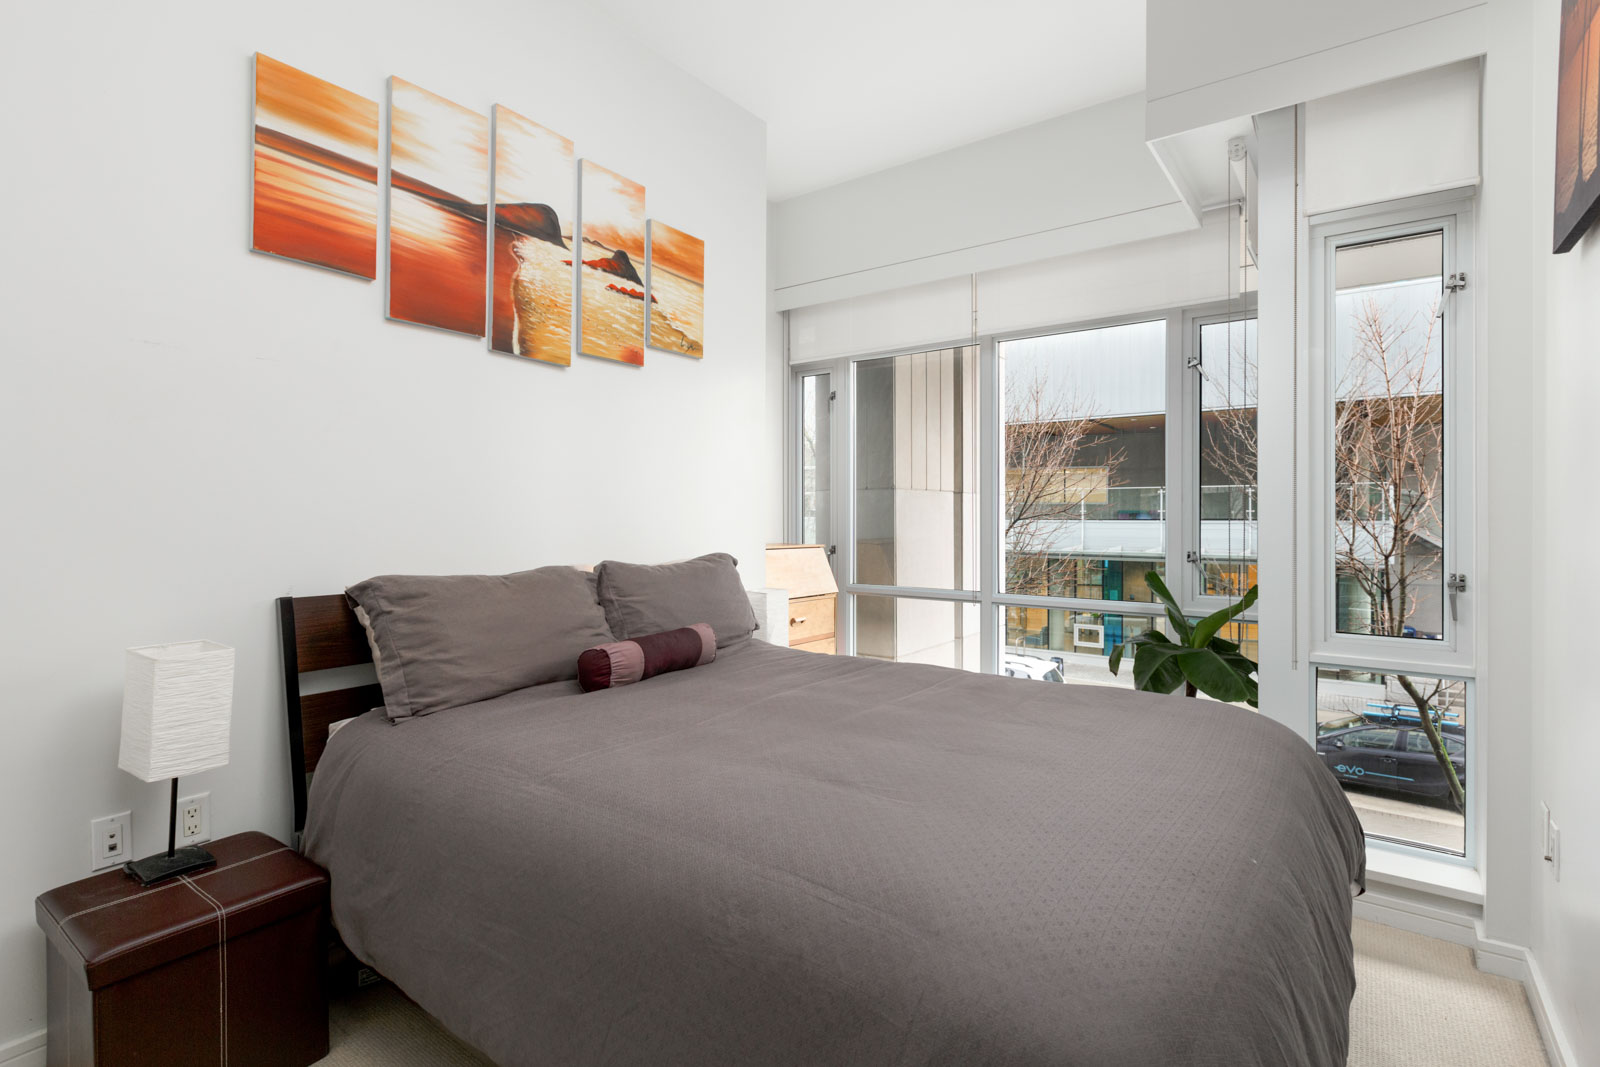 queen size bed with dark grey sheets in condo bedroom with painting above and floor to ceiling windows on right looking outside